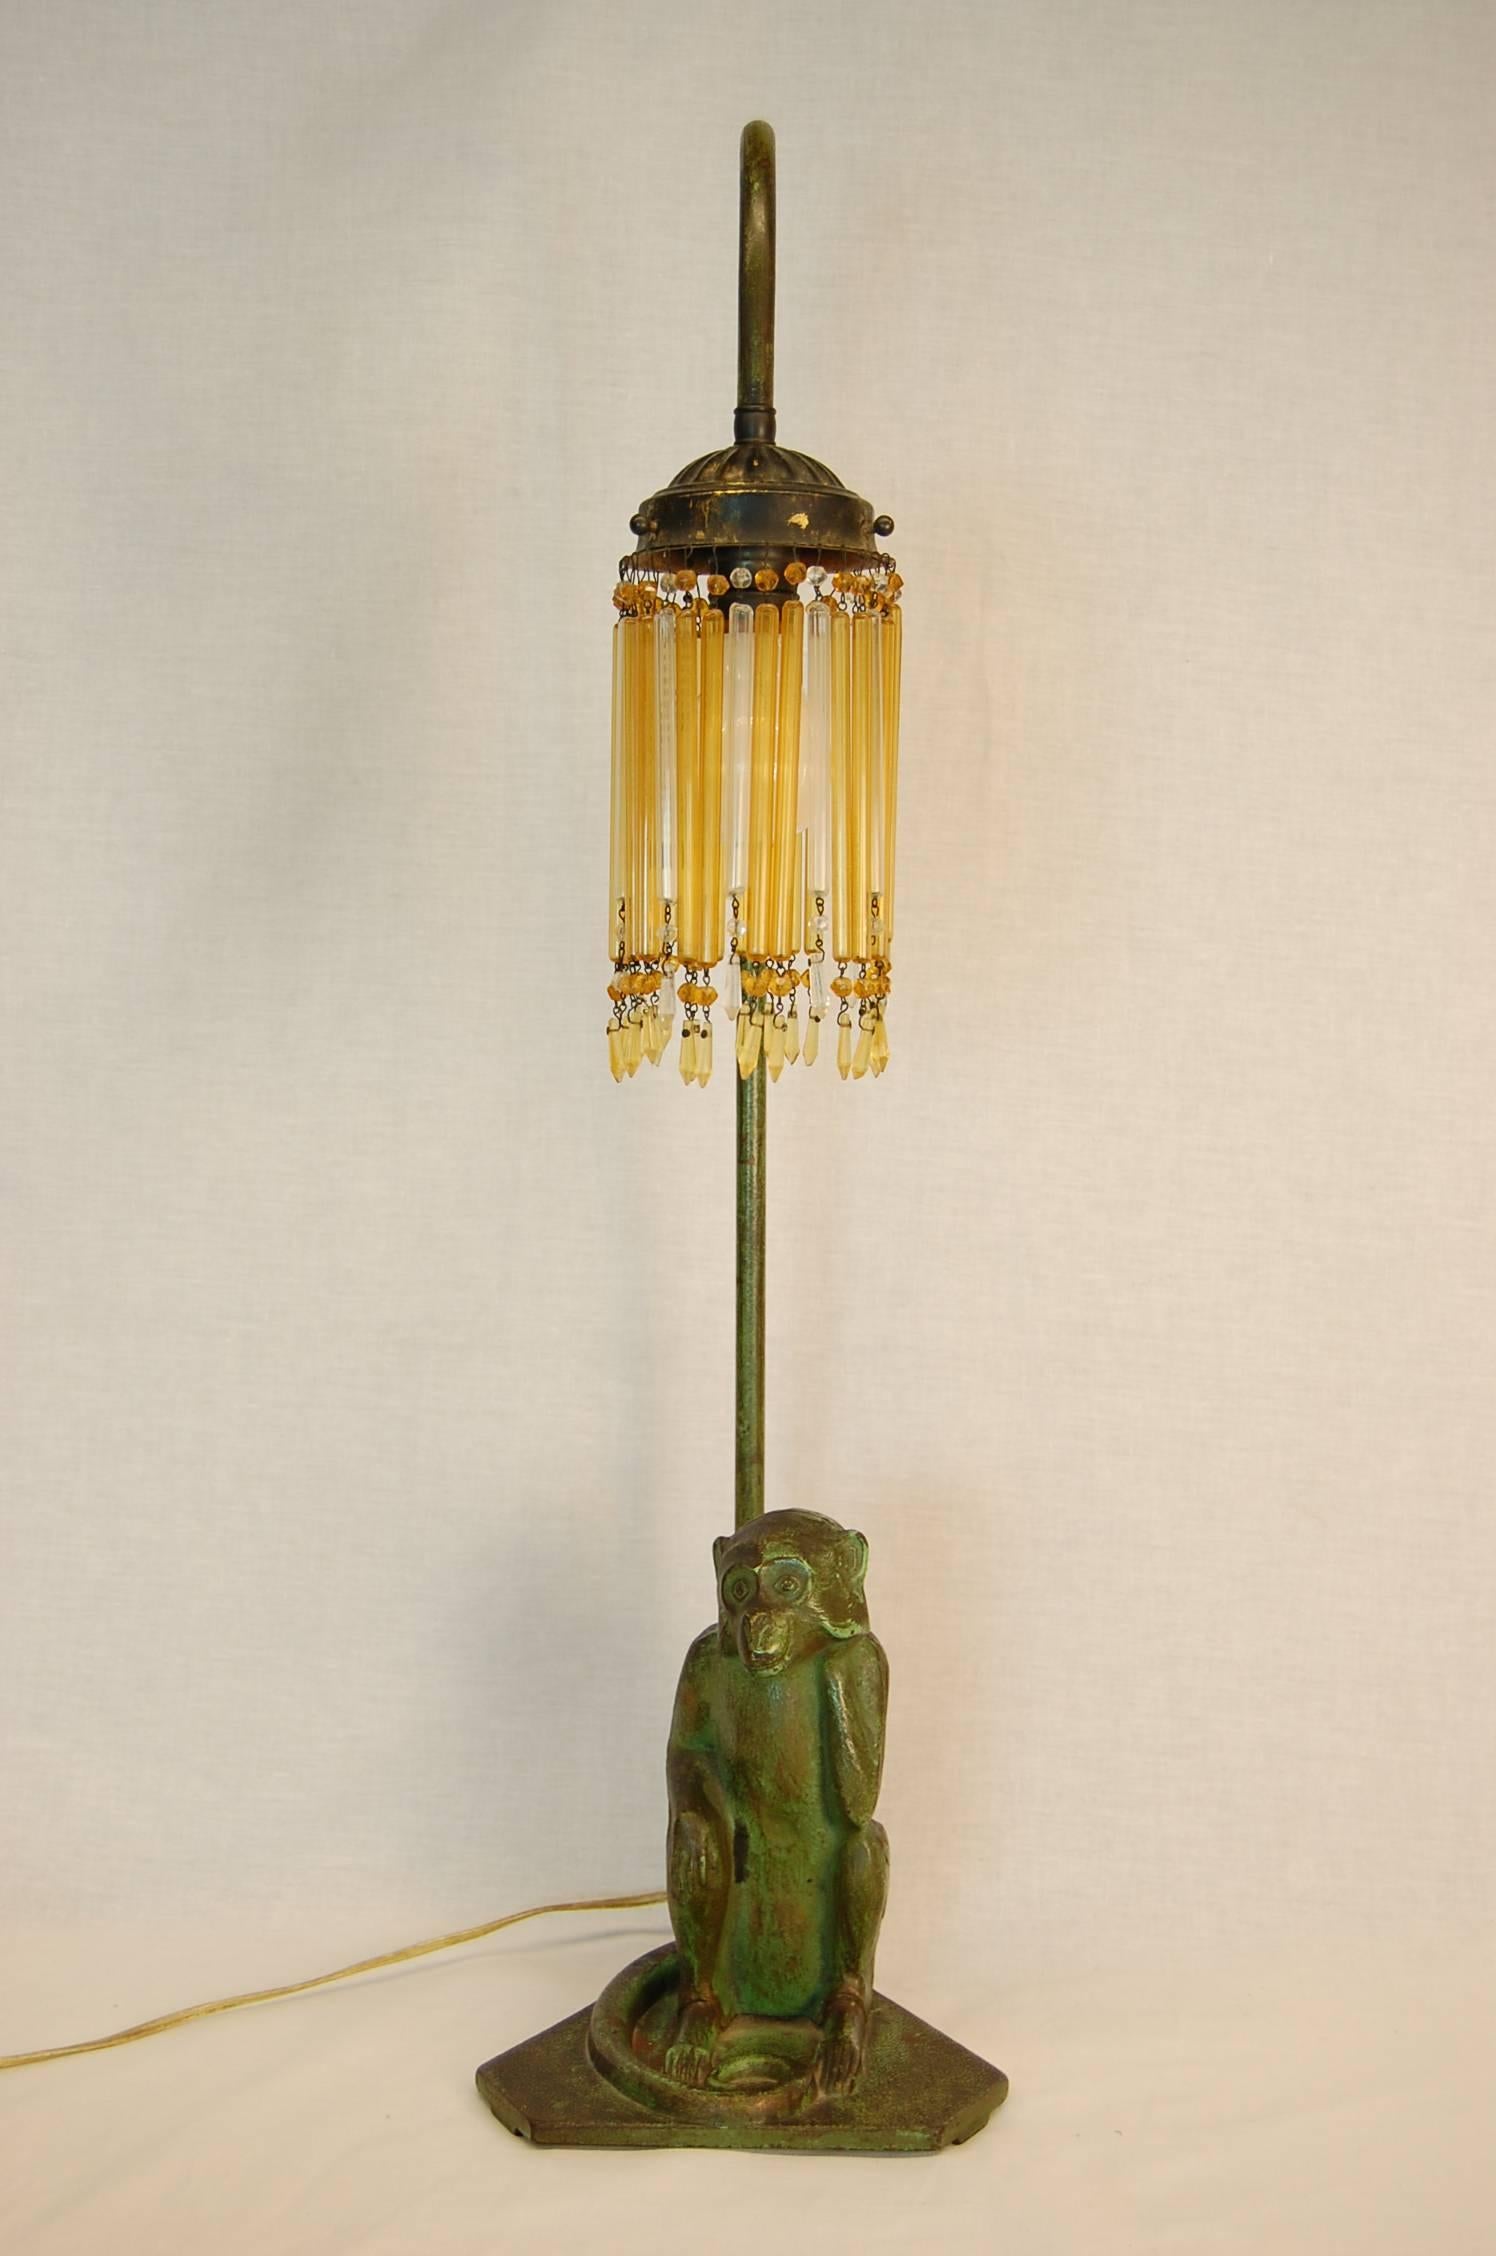 Wonderful cast metal figure of a monkey on a base wired as a lamp with amber glass prisms in a modeled green painted finish. Recently wired.